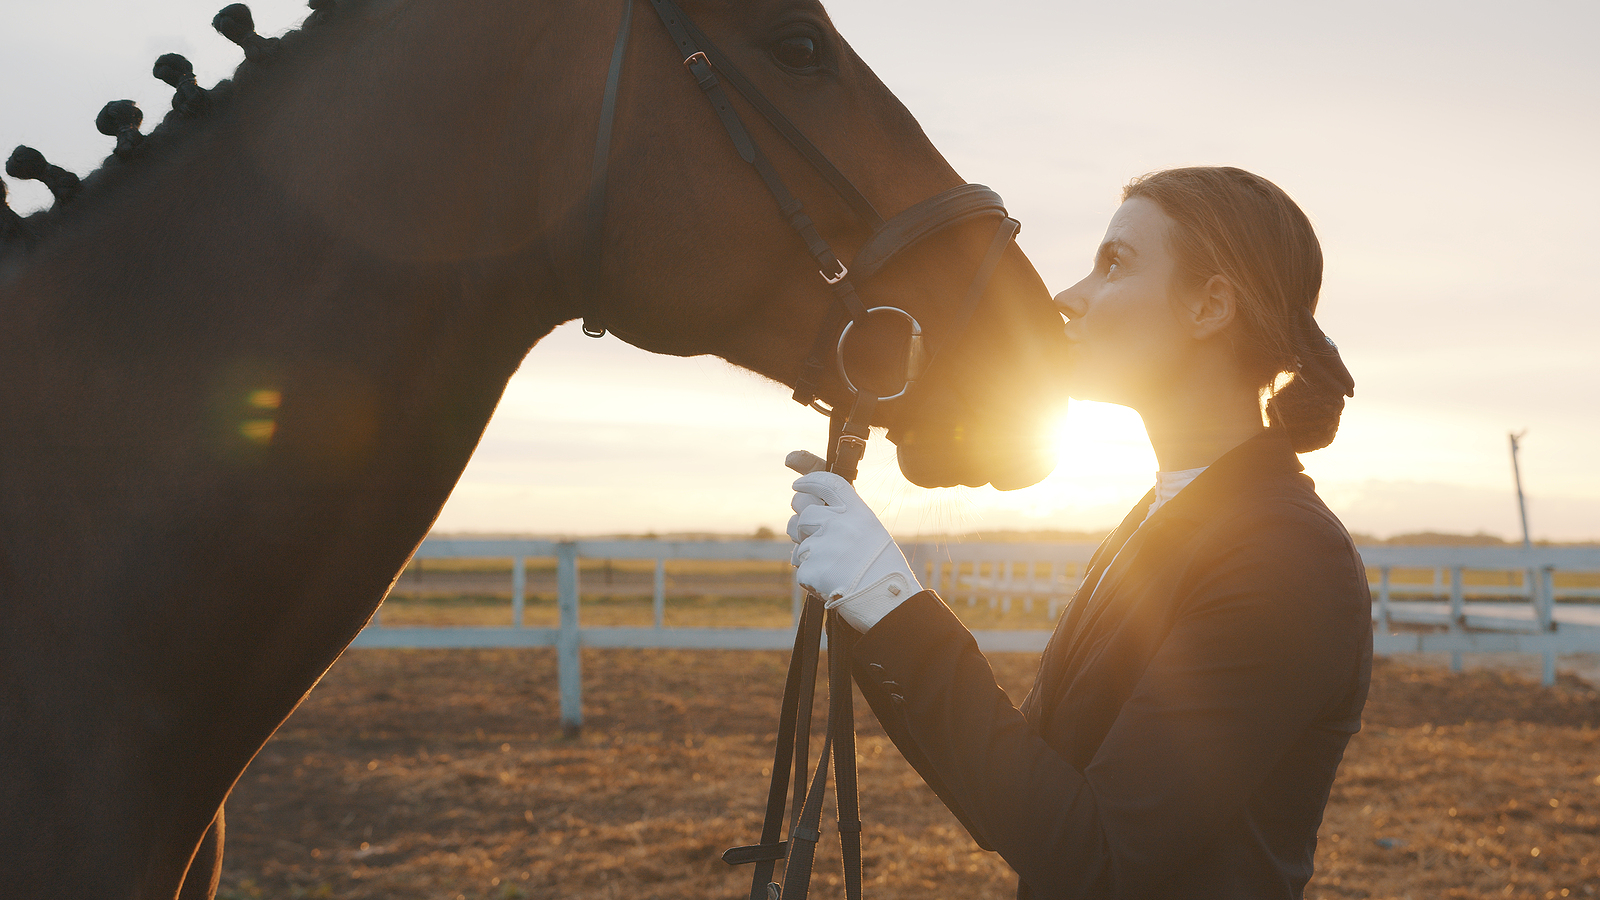 Image of a rider with a horse. This image could depict someone who is needing therapy after a divorce in Virginia. Get started with grief counseling in Virginia today. 22974 | 22902 | 22947